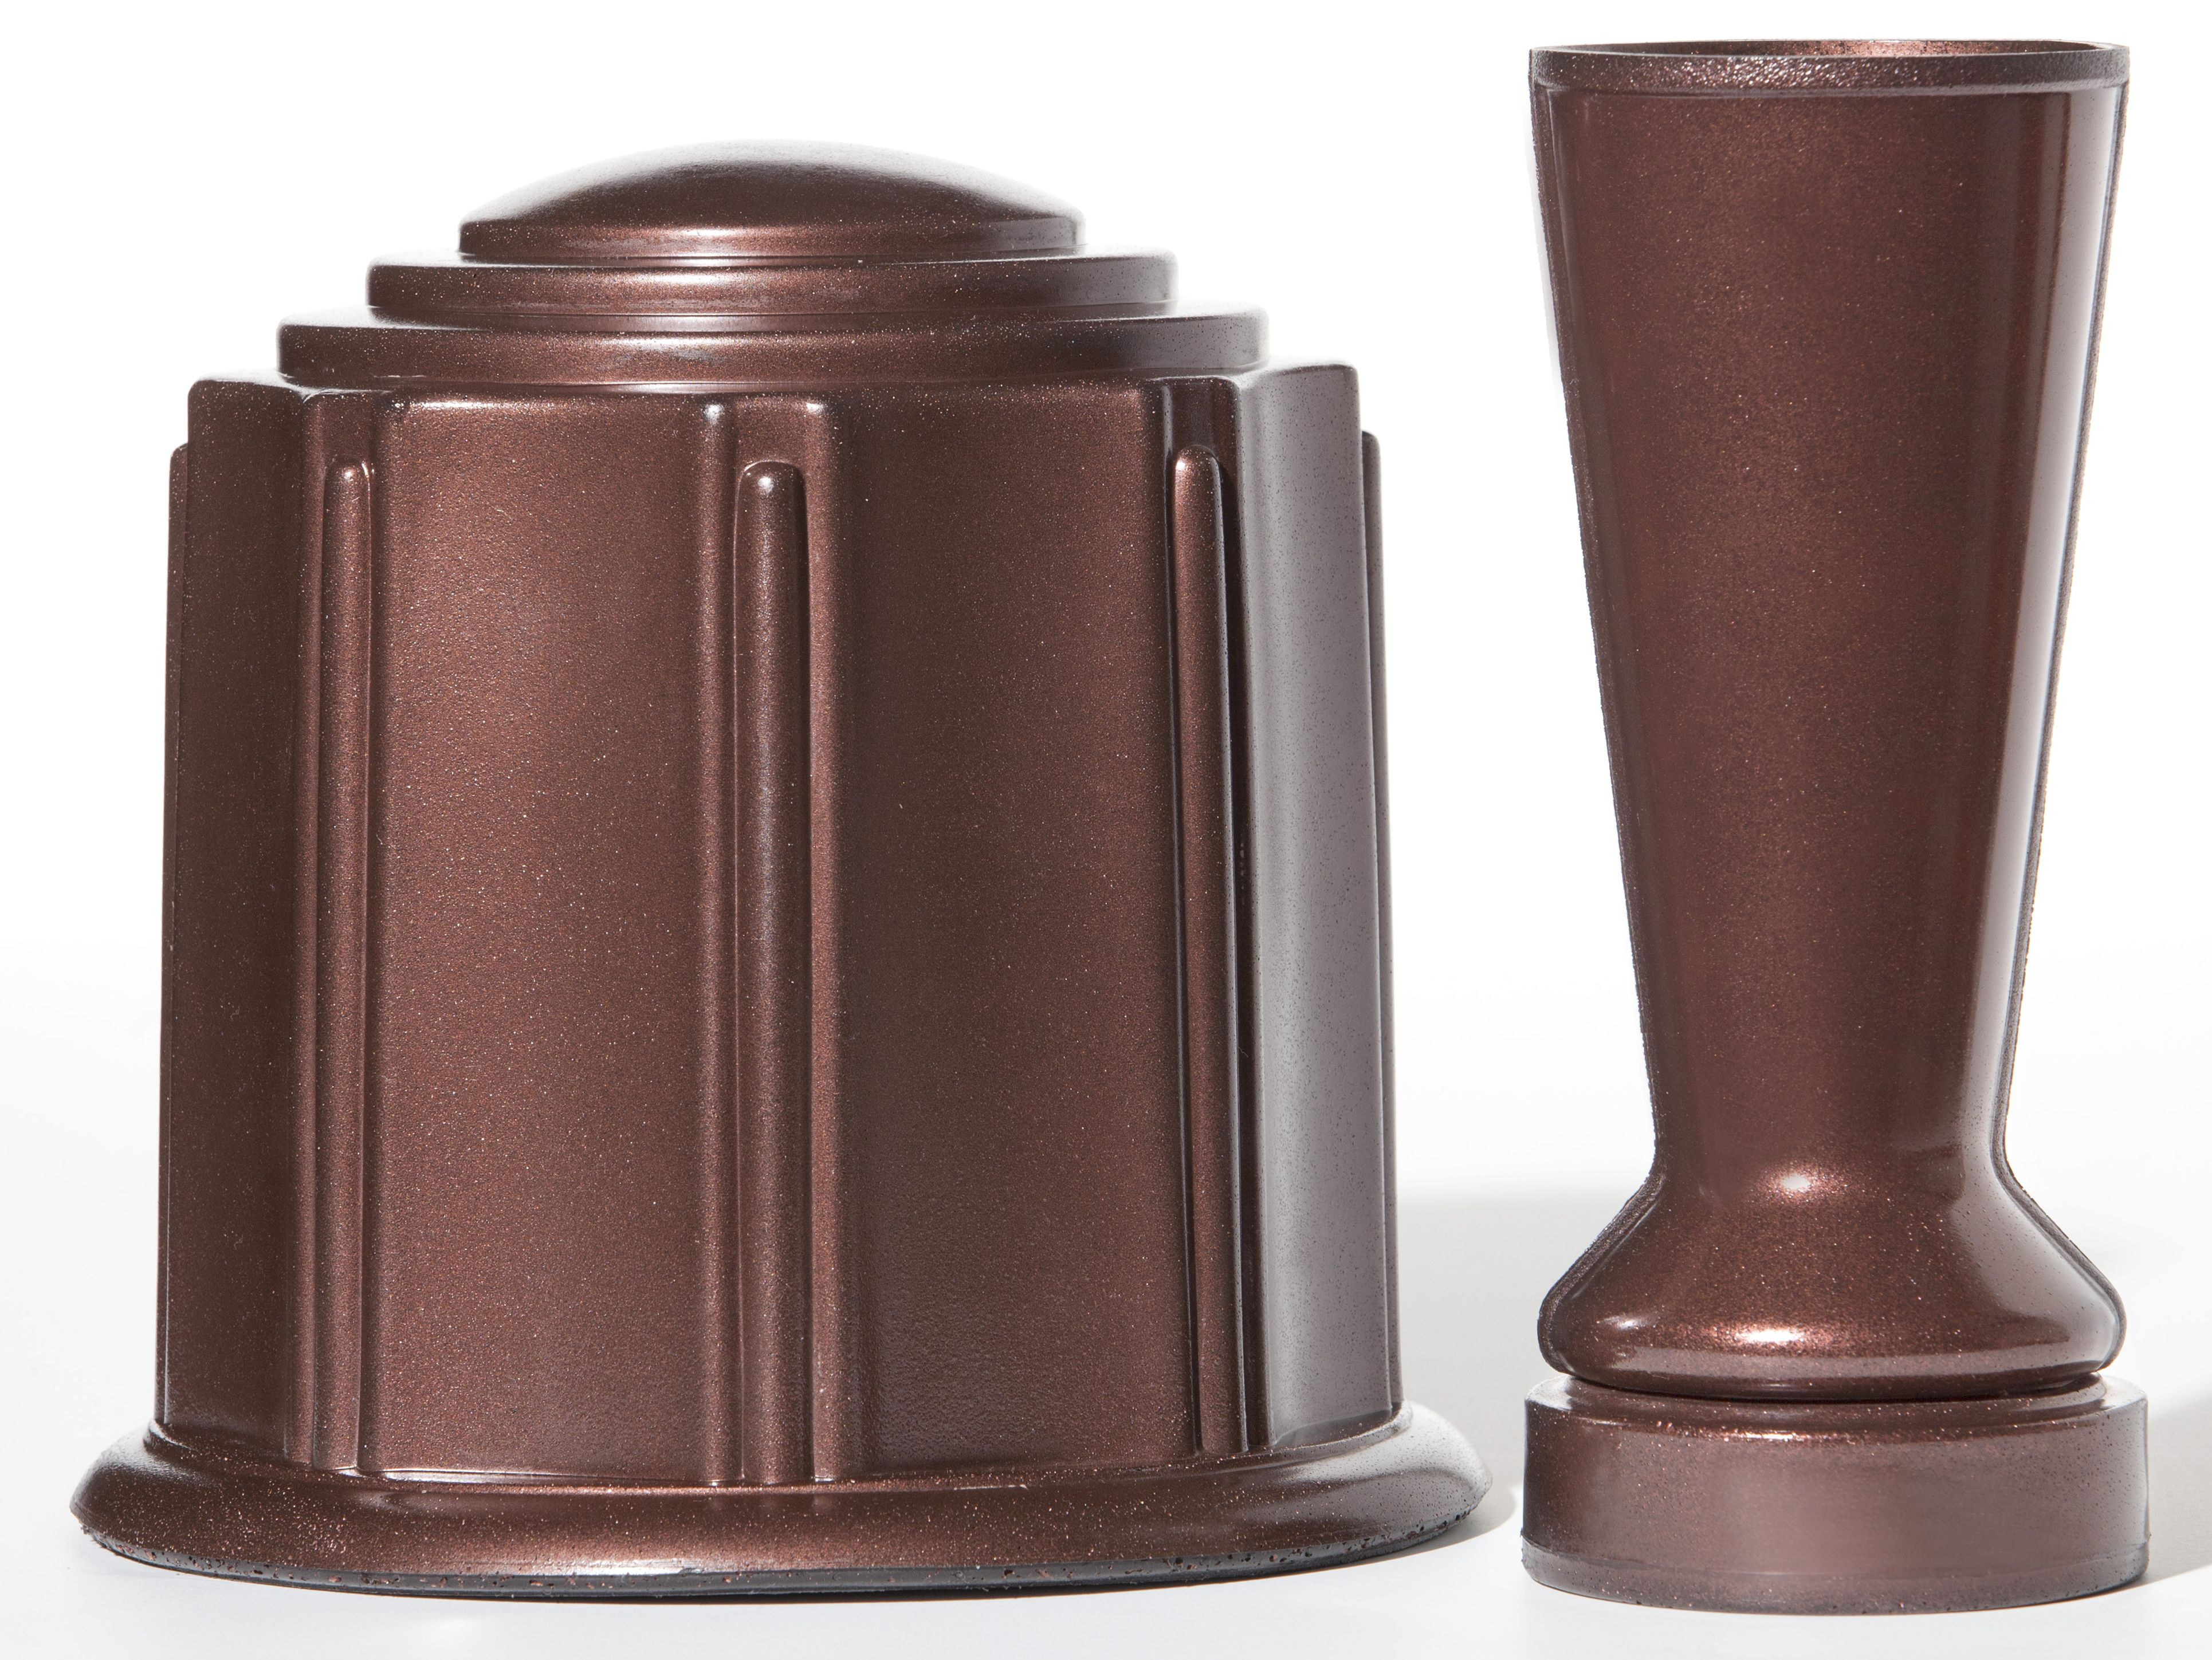 21 Perfect Bronze Cemetery Vases for Sale 2024 free download bronze cemetery vases for sale of foreversafe products theft deterrent water tight urn and cemetery with foreversafe products theft deterrent water tight urn and cemetery flower vase both in